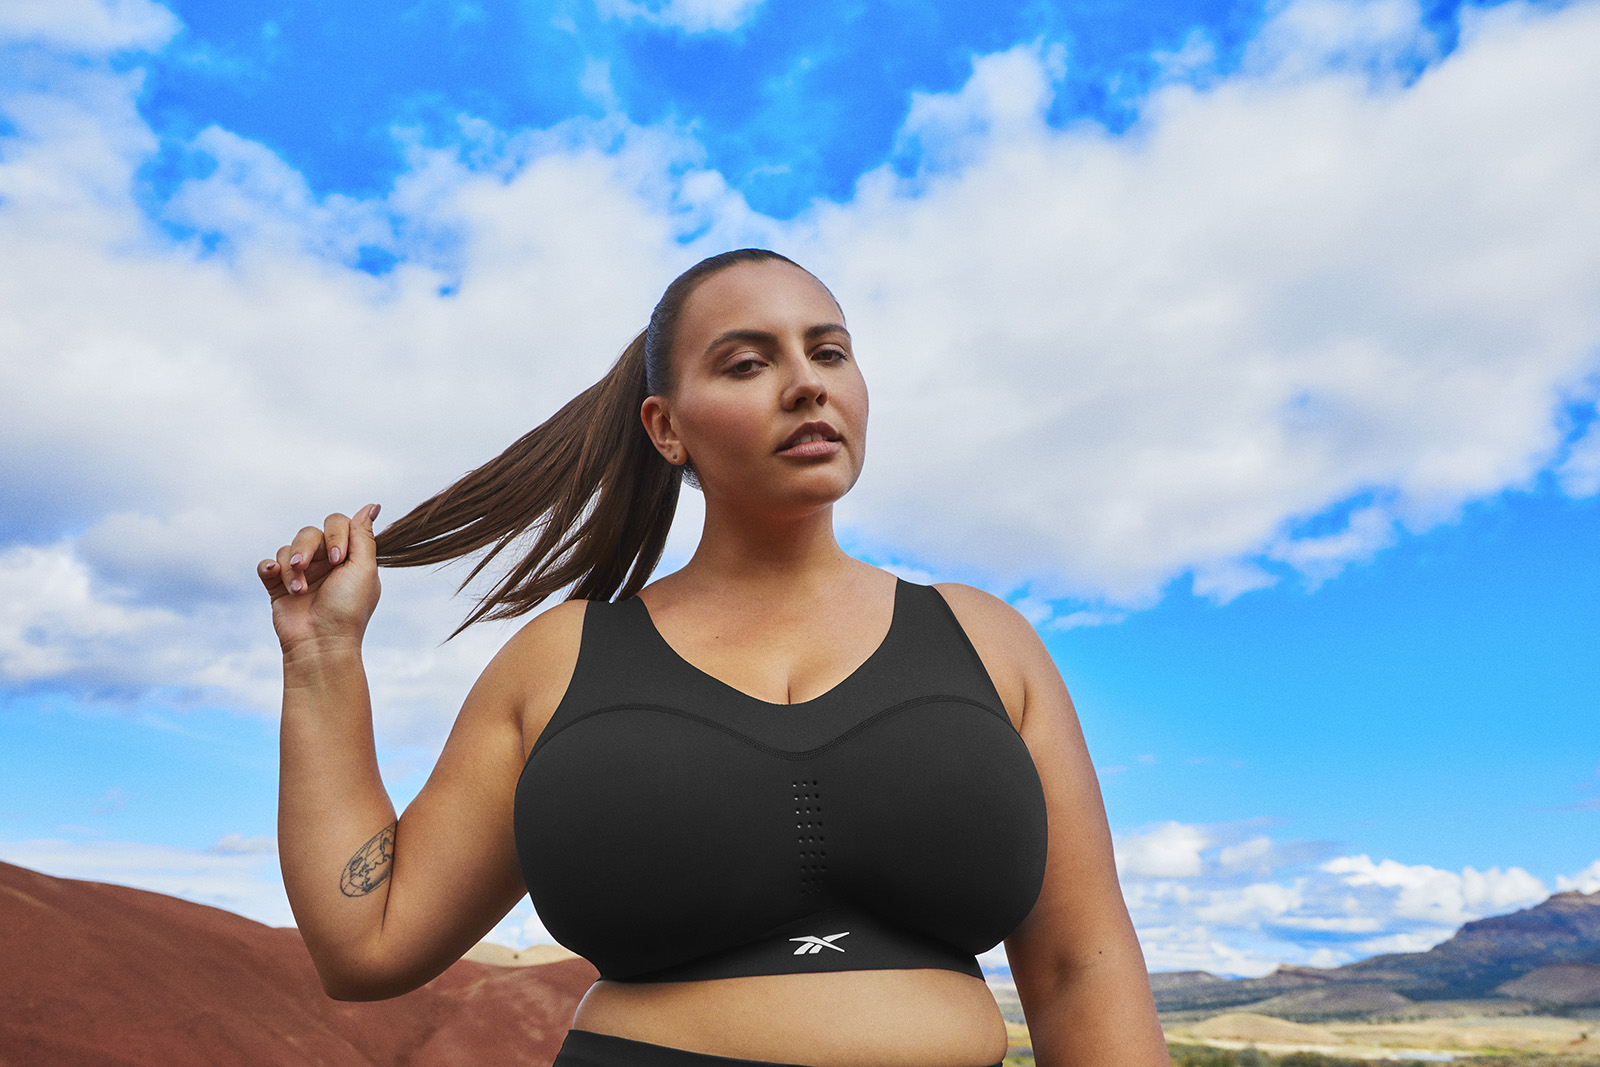 Woman wearing a black bra stands on a red hillside, with puffy clouds in a blue sky behind her.